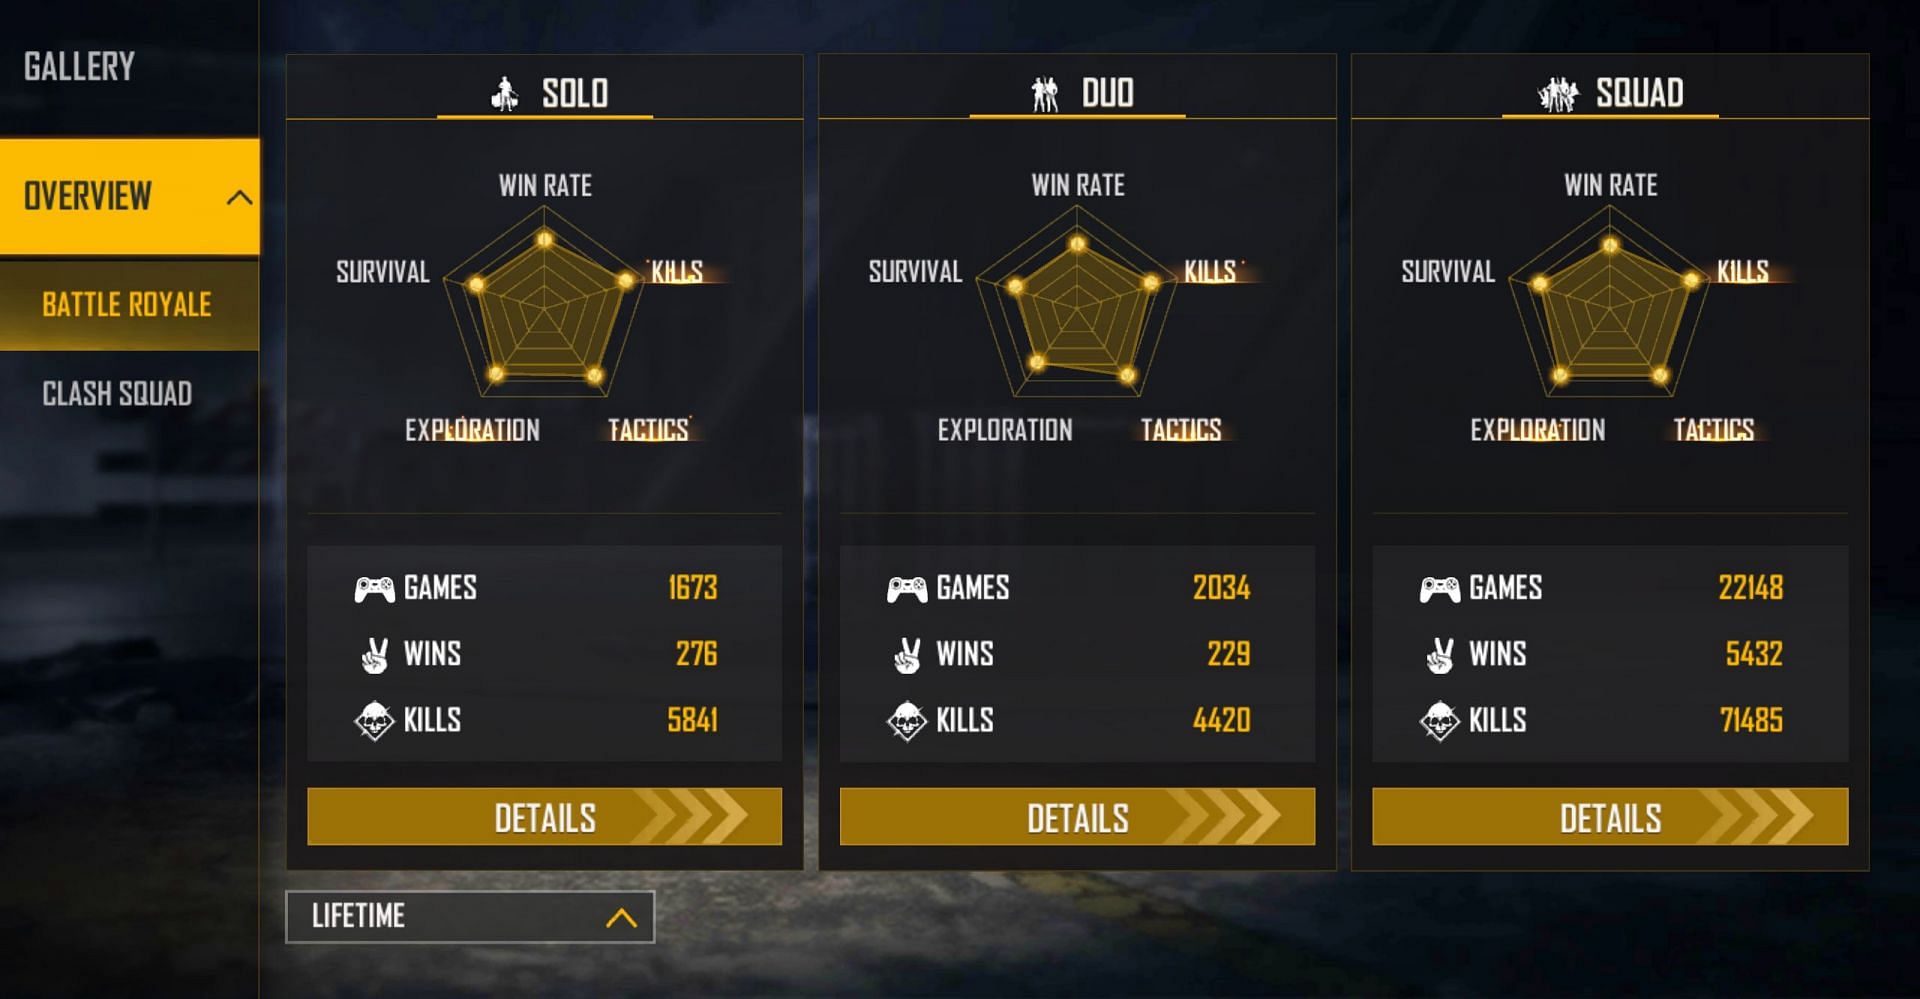 Pahadi Gamer has retained a K/D ratio of 4.18 in solo games (Image via Free Fire)